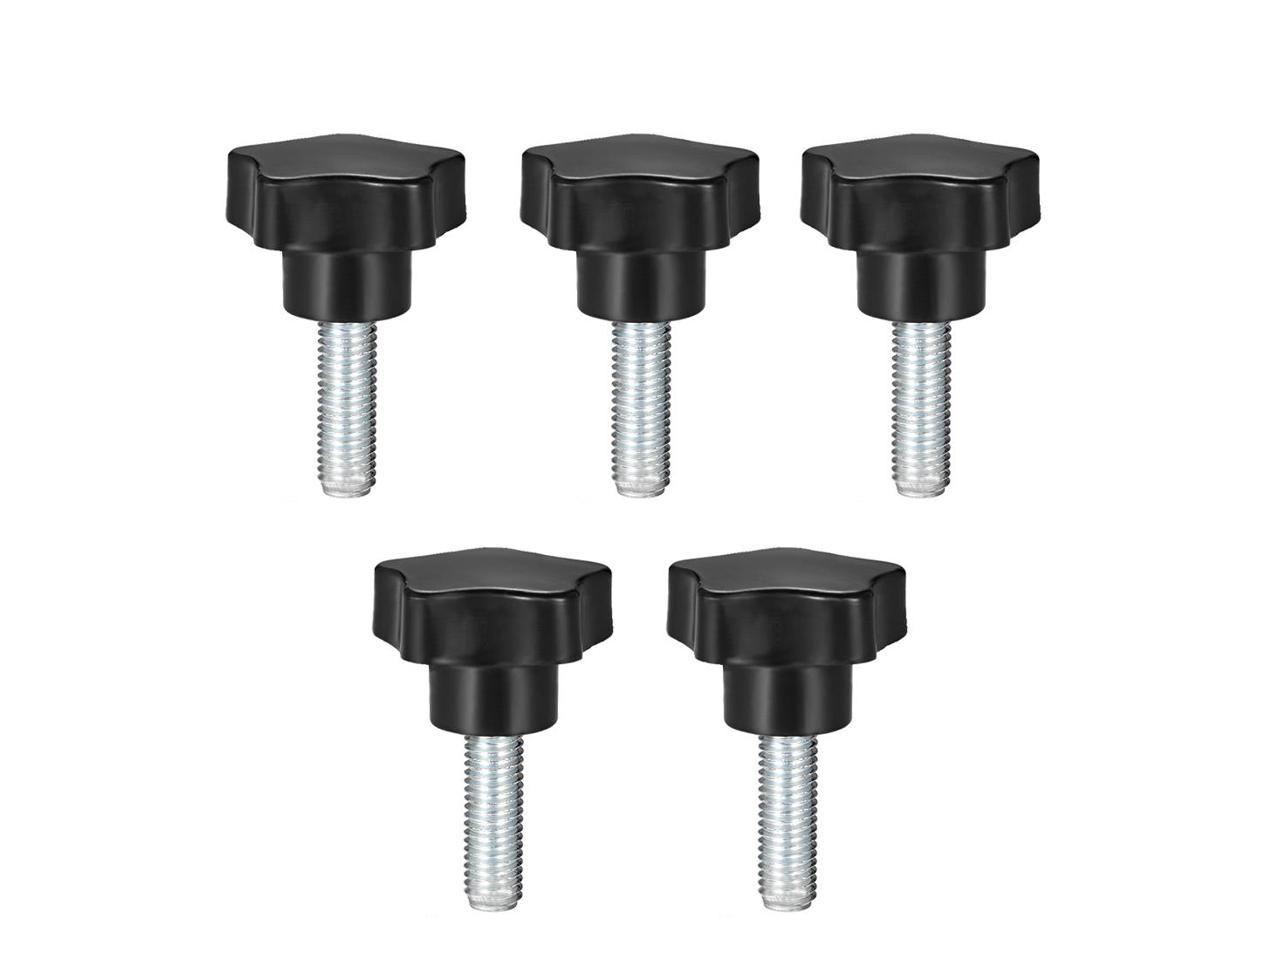 Aicosineg M12 x 40mm Male Thread 50mm Dia Star Knobs Grips Handle Hardware Zinc Stud Replacement for Industry Mechanical Equipment Furniture Black Tone 3pcs 